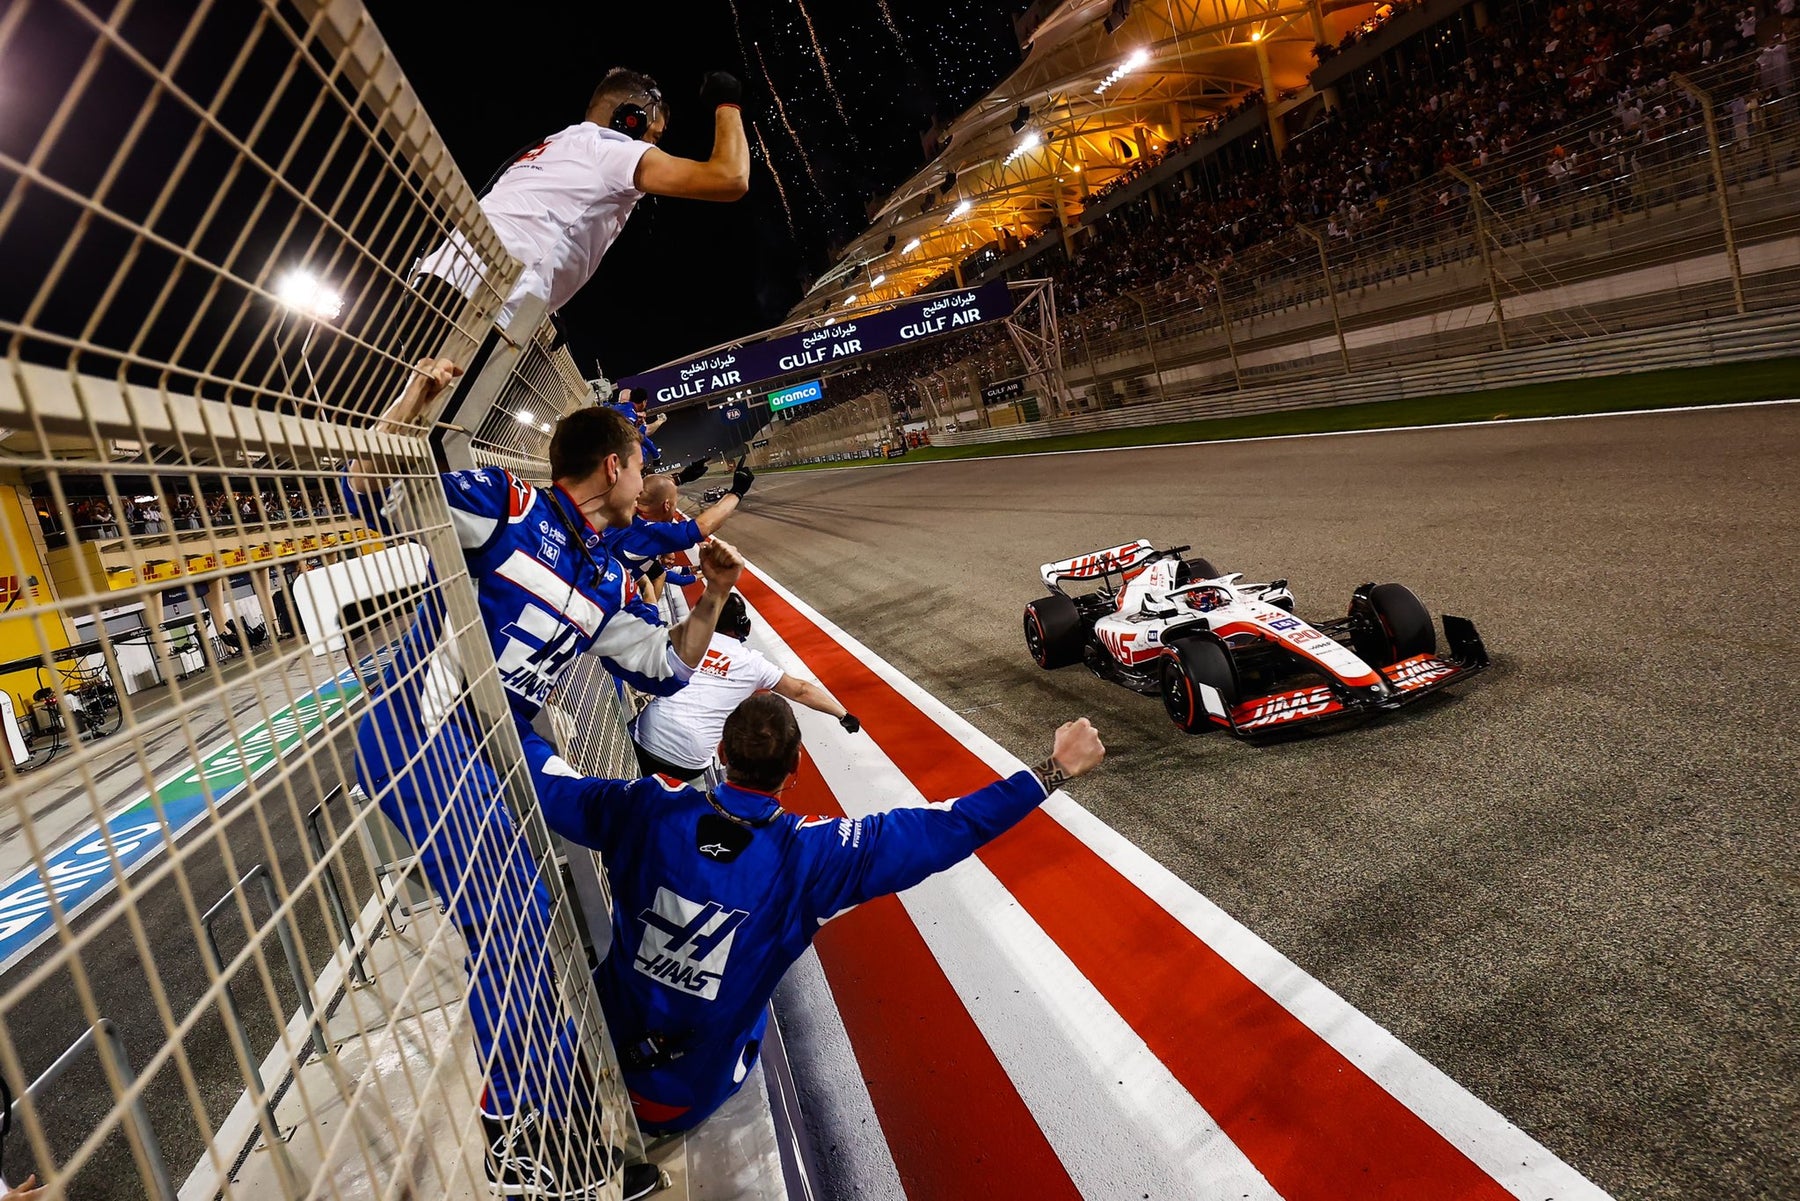 KEVIN MAGNUSSEN PRODUCES SENSATIONAL DRIVE IN F1 SEASON OPENER AT THE BAHRAIN GRAND PRIX